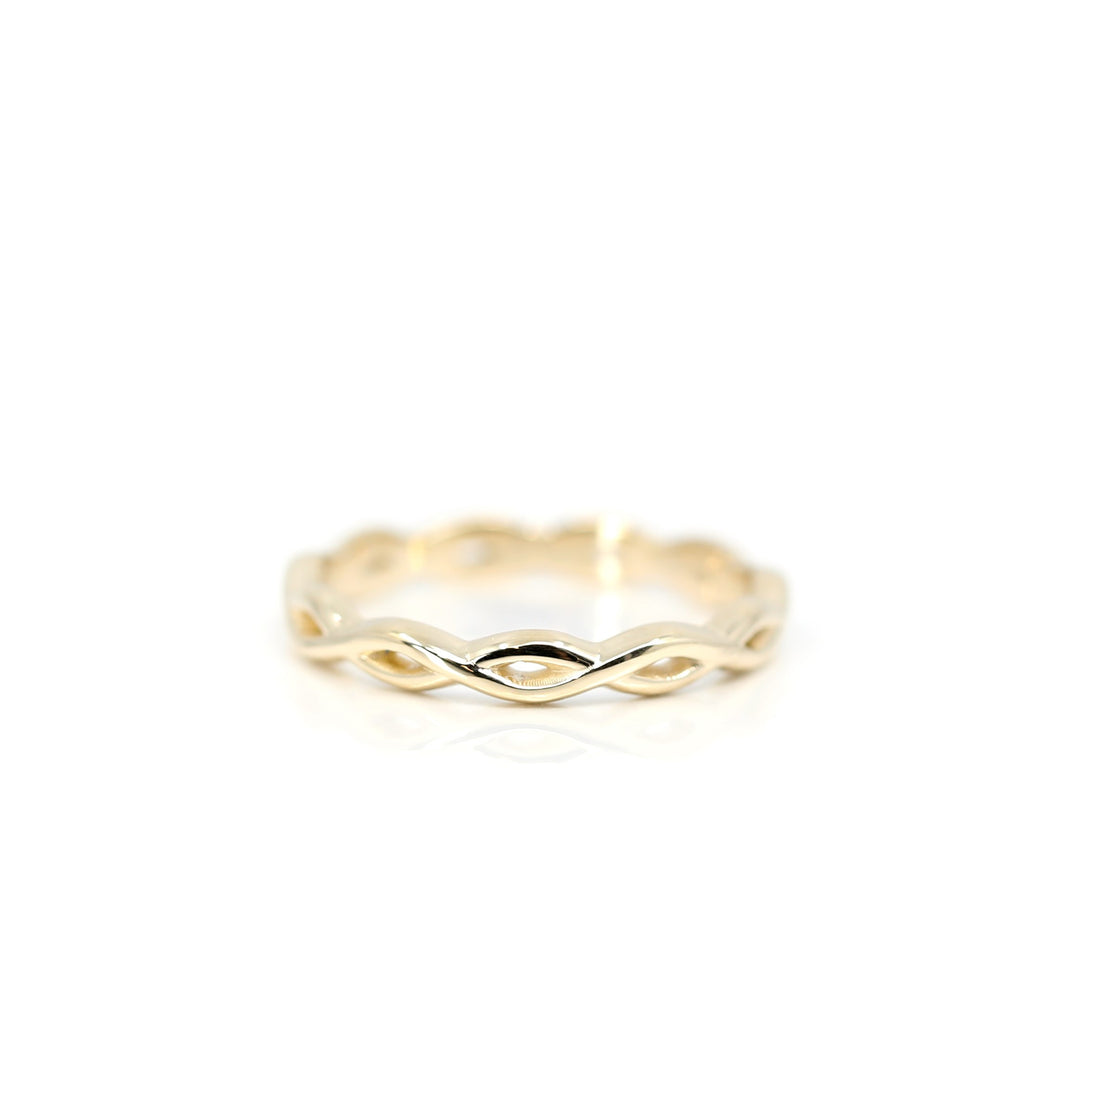 yellow gold braided twist wedding band custom made in montreal by bena jewelry